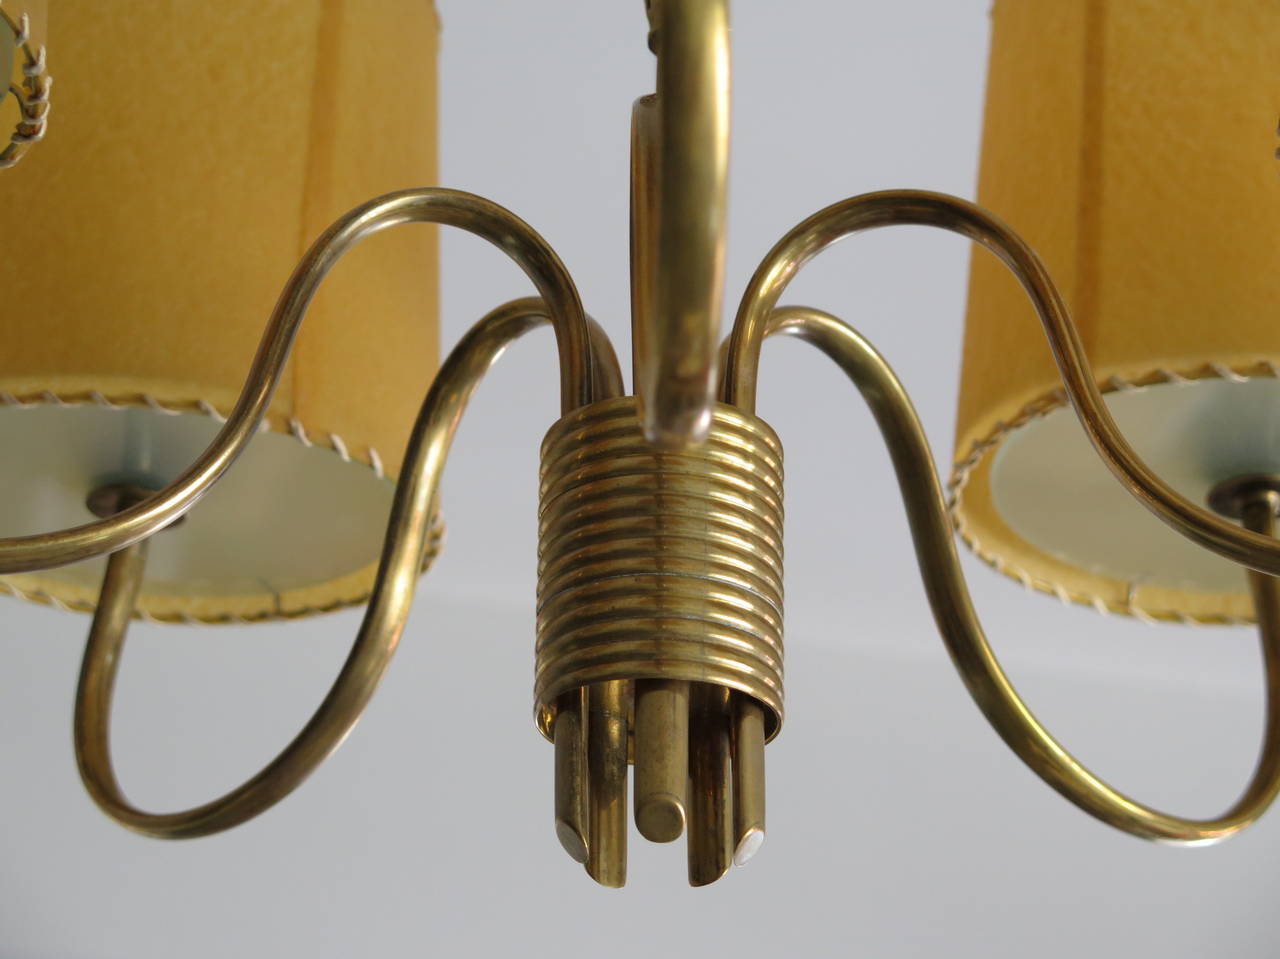 A Paavo Tynell for Taito chandelier. Brass with stylized leaf decoration.